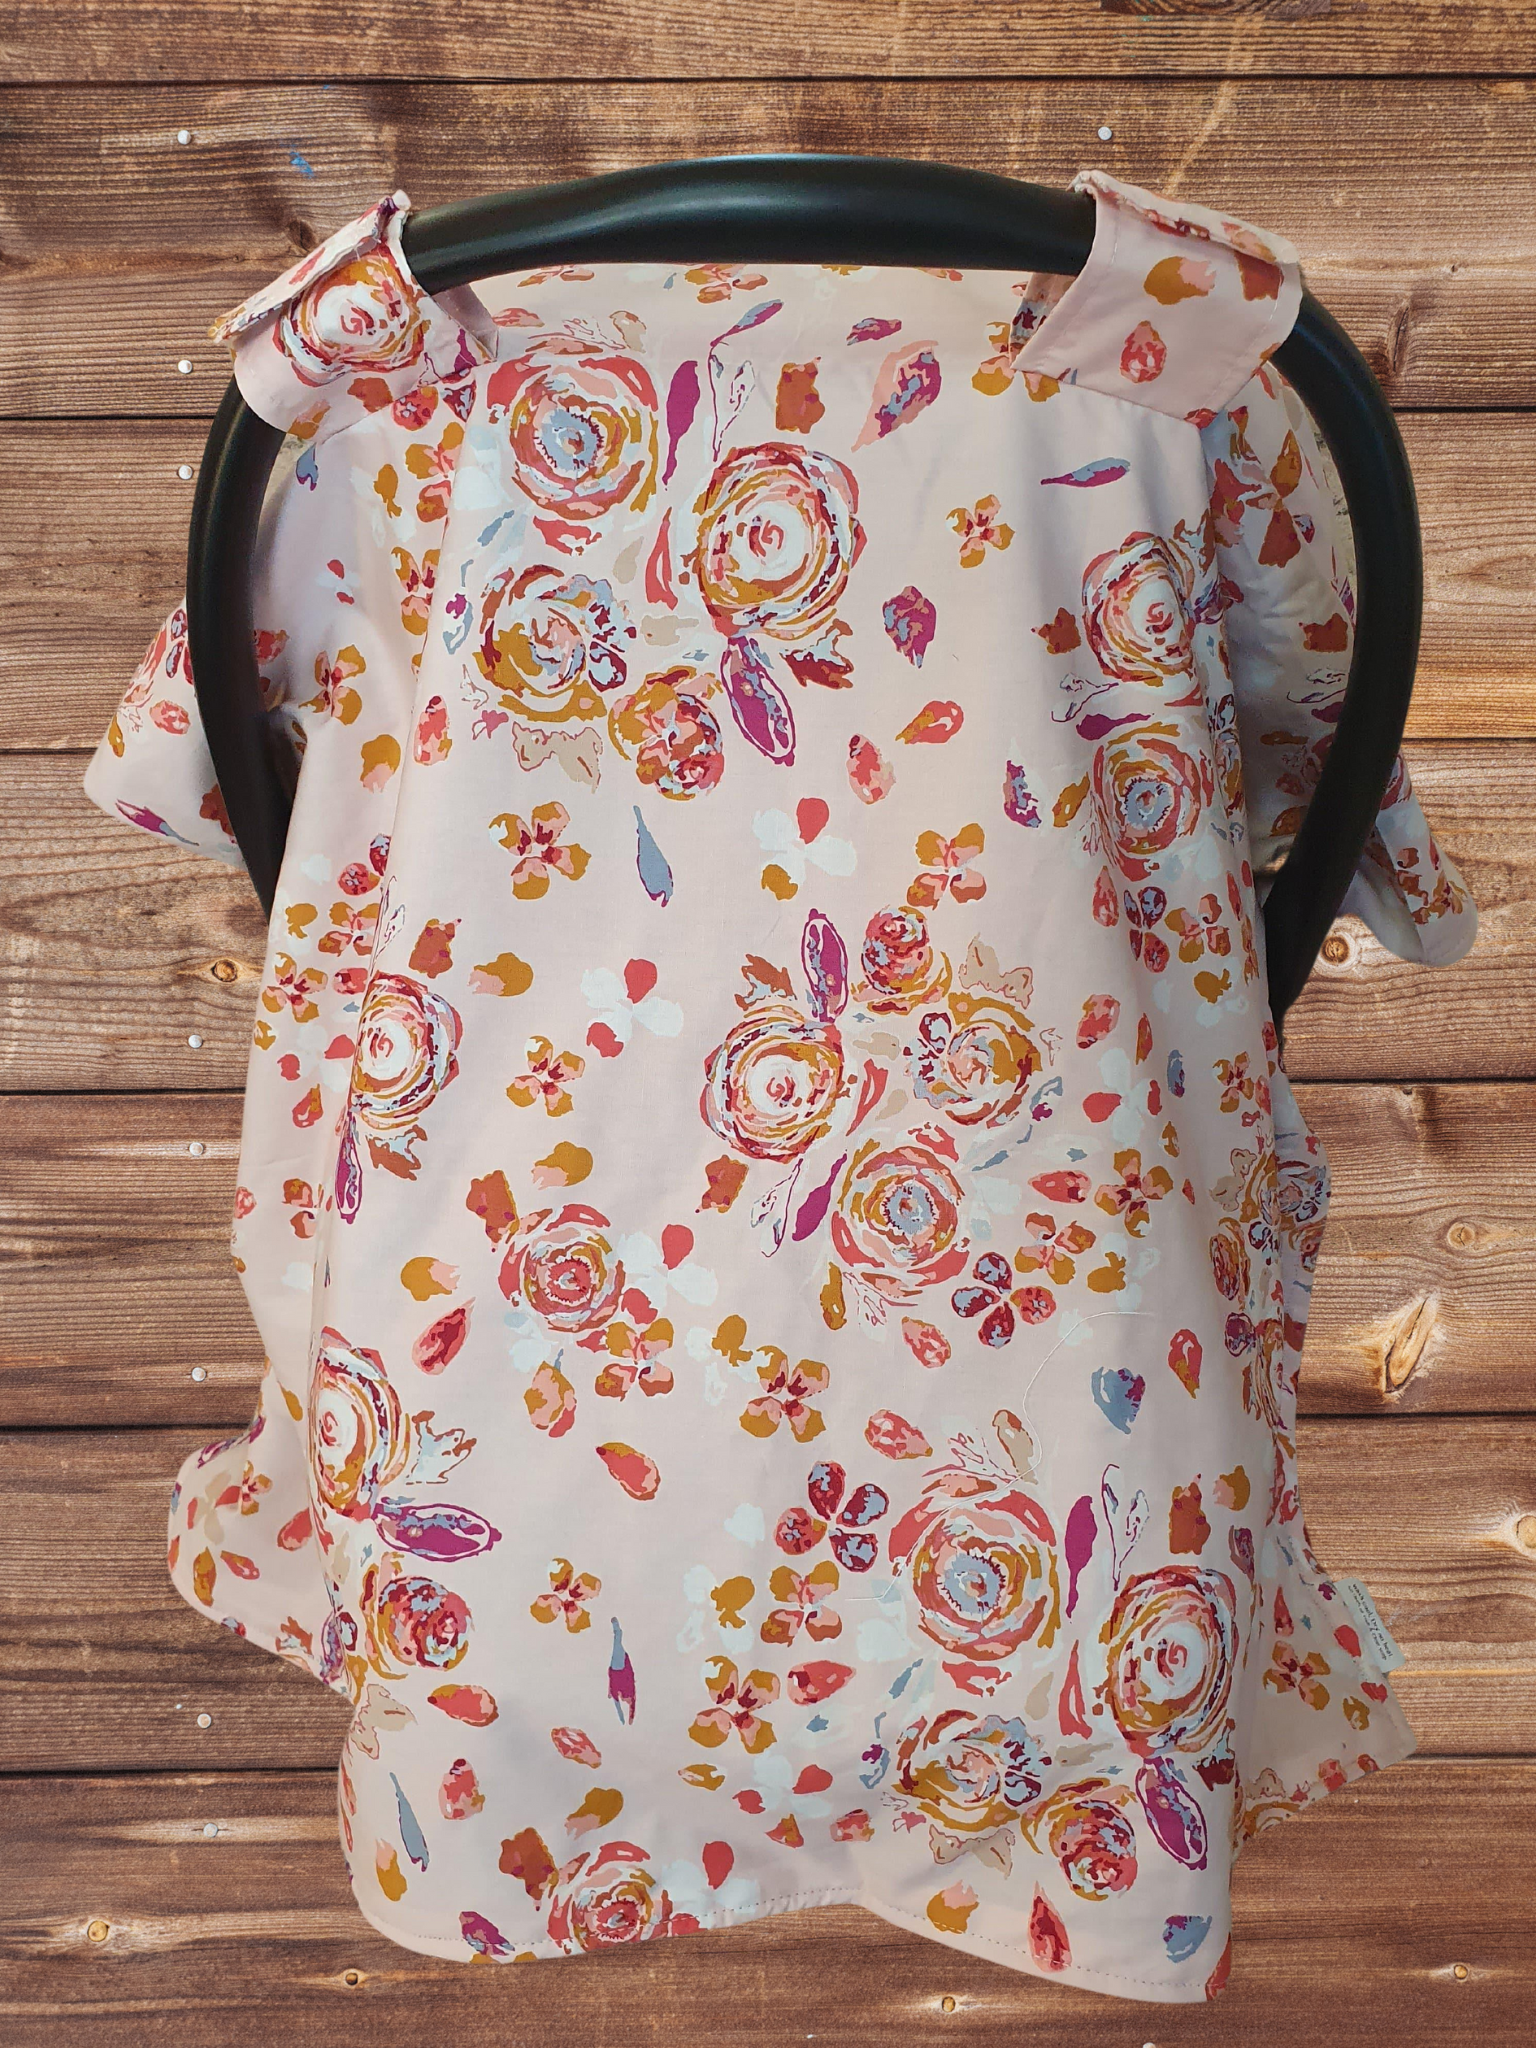 Carseat tent - Peach Summer Floral Tent - DBC Baby Bedding Co 